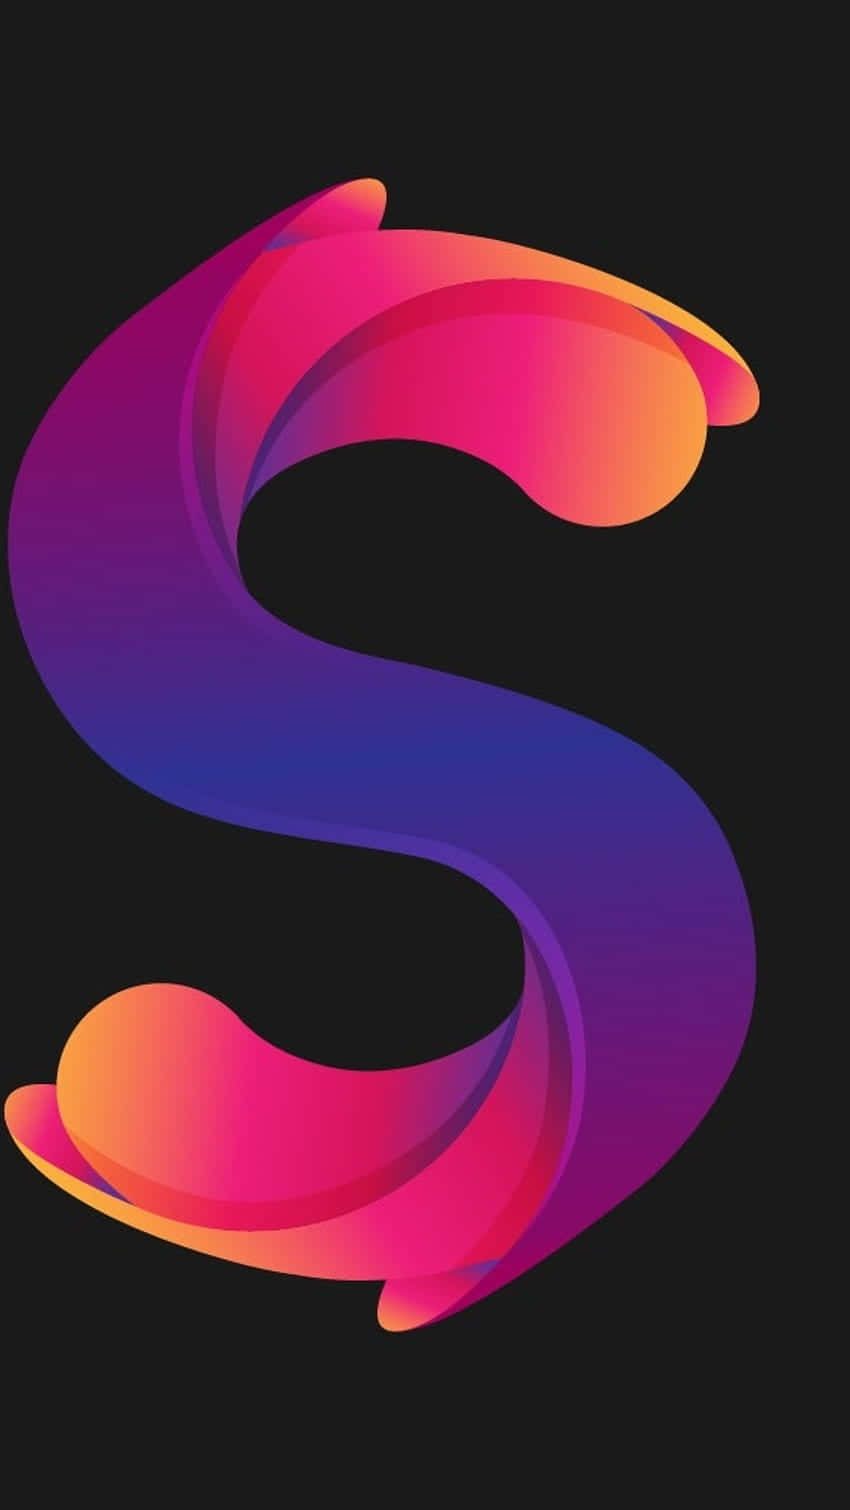 A Colorful Logo With The Letter S